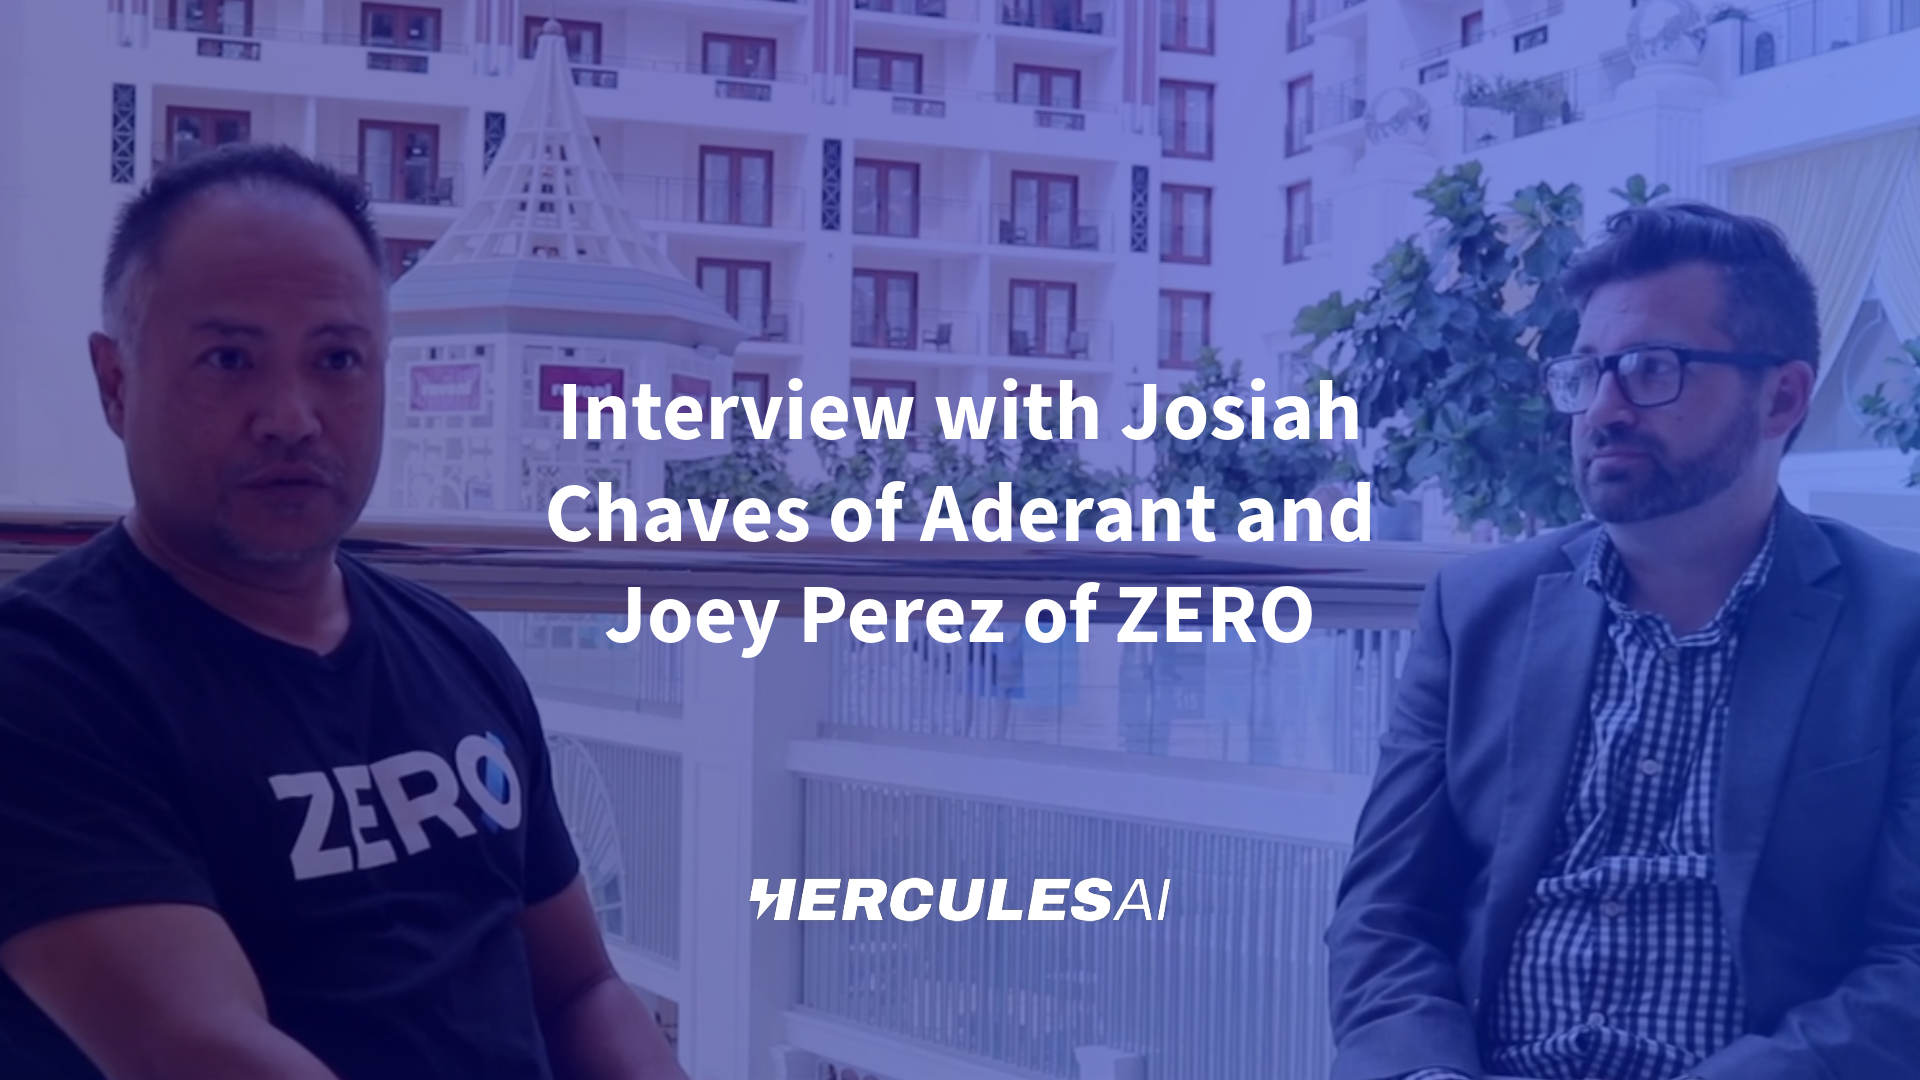 Interview with Josiah Chaves of Aderant and Joey Perez of ZERO